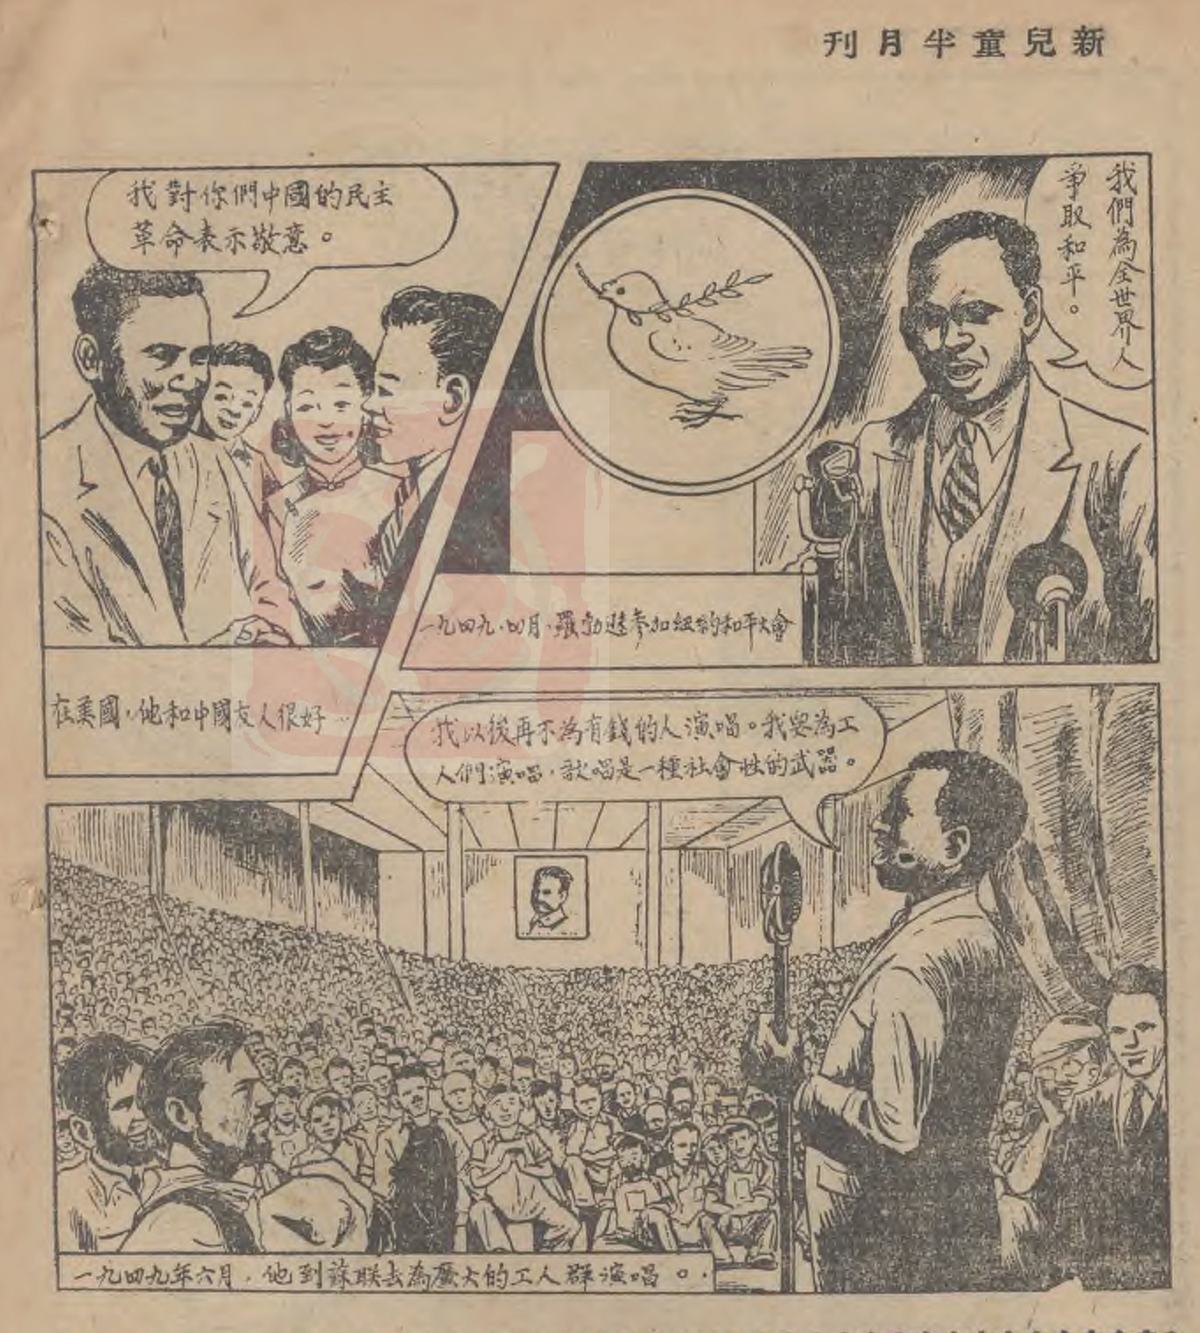 Black and white comic showing Paul Robeson speaking at a microphone.